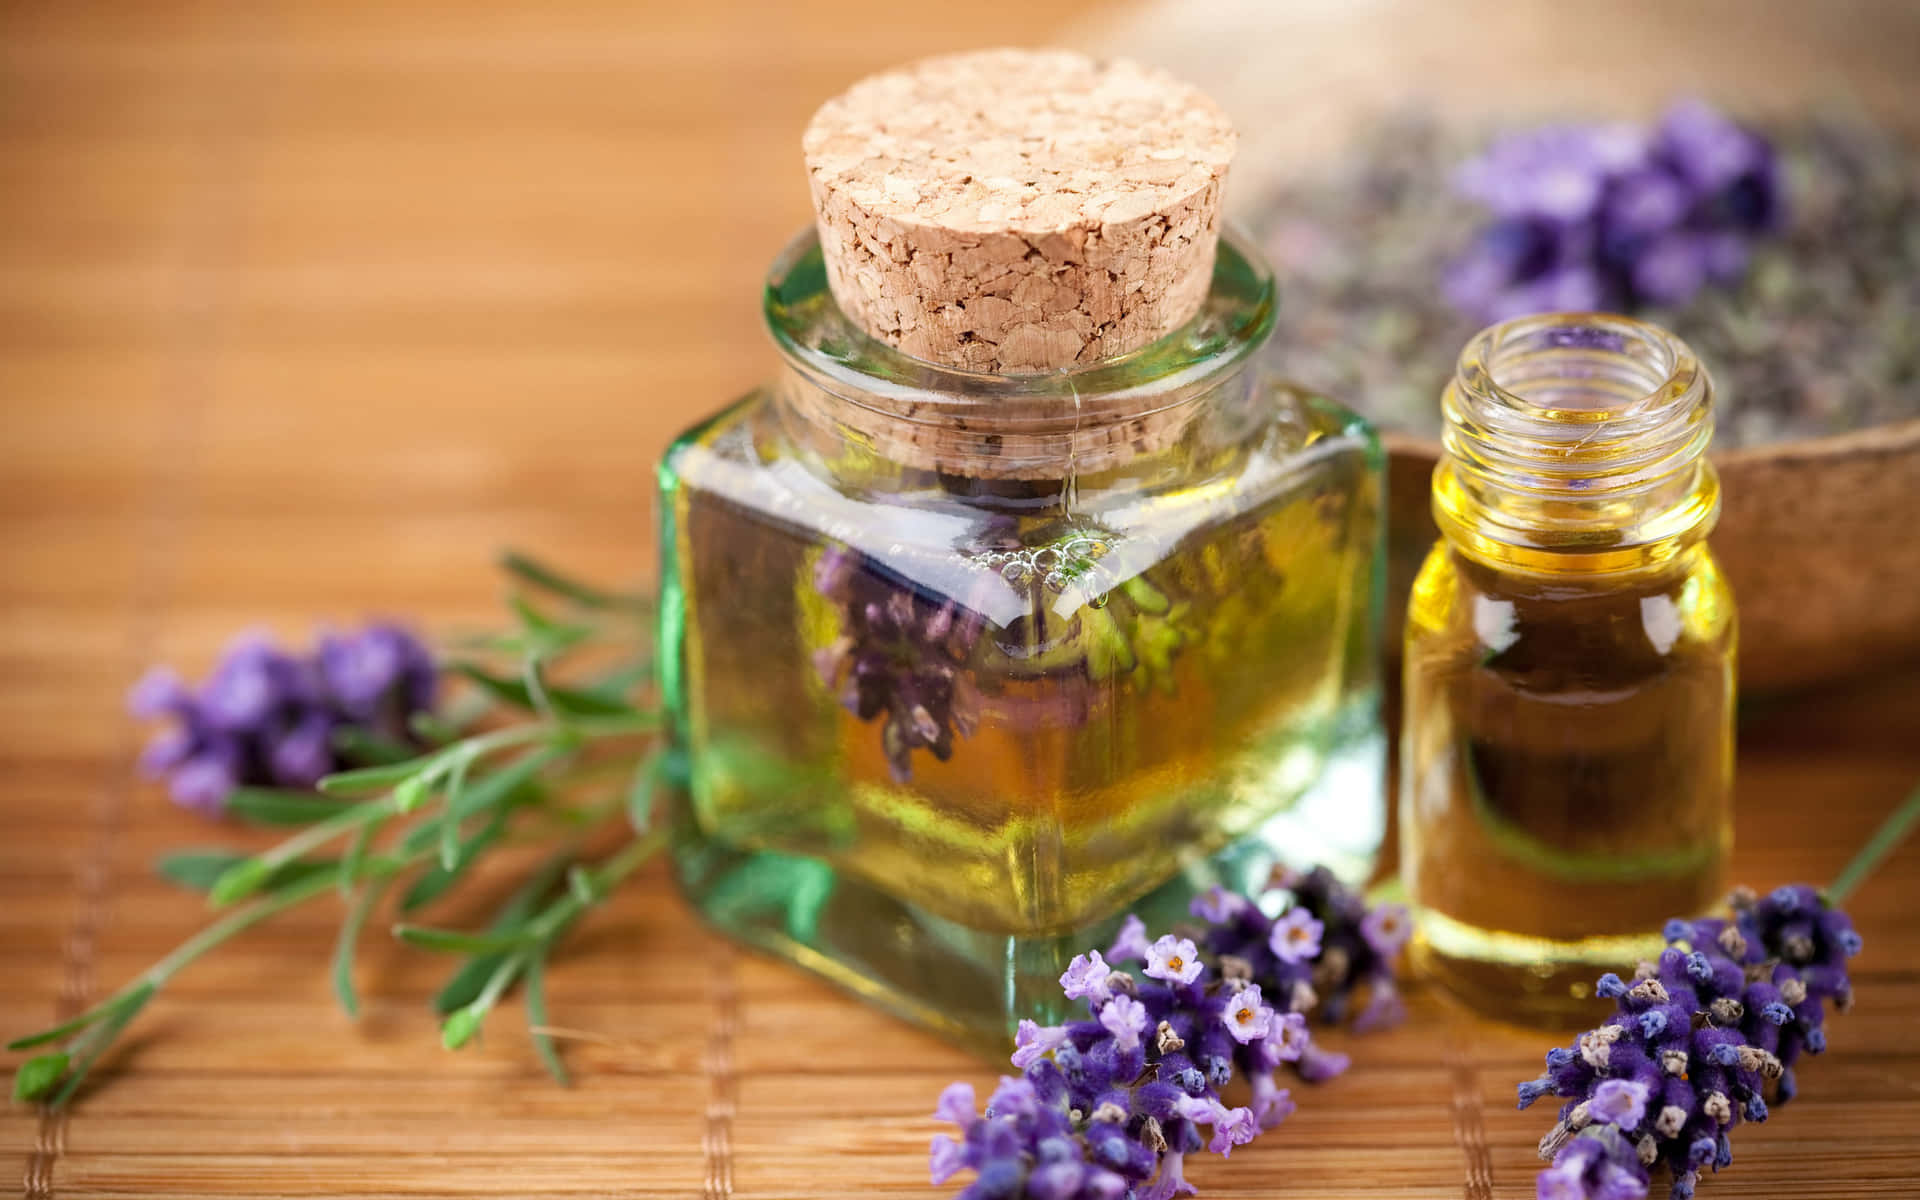 Aromatherapy helps to improve moods and energy with the use of essential oils. Wallpaper